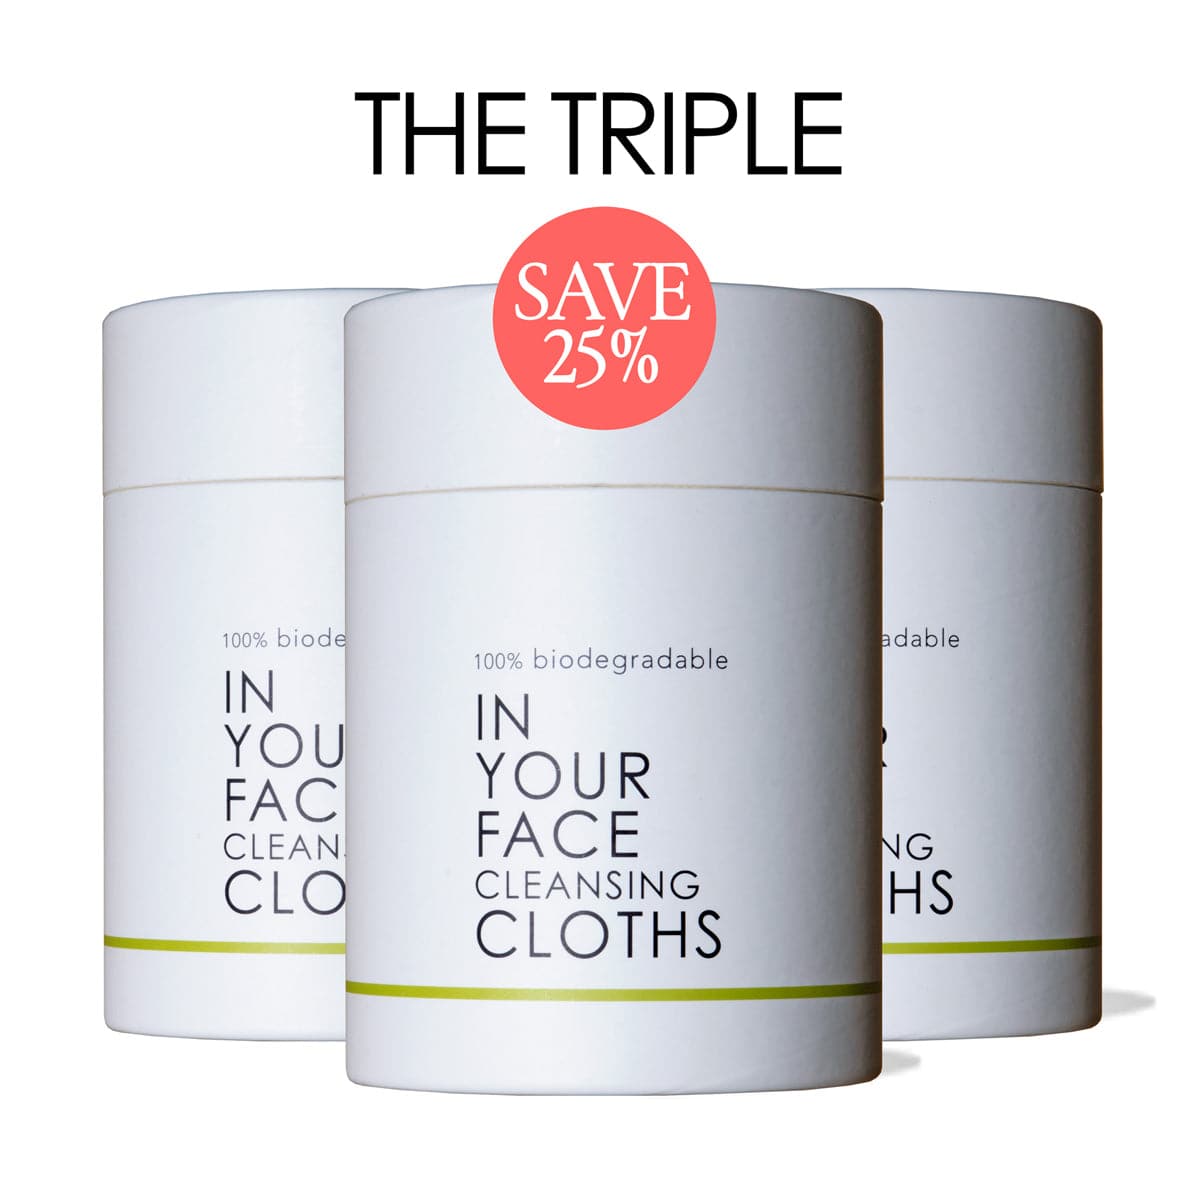 A photo of 3 containers of the CLEANSING CLOTHS with a badge that says "save 25%" and the text says "THE TRIPLE".